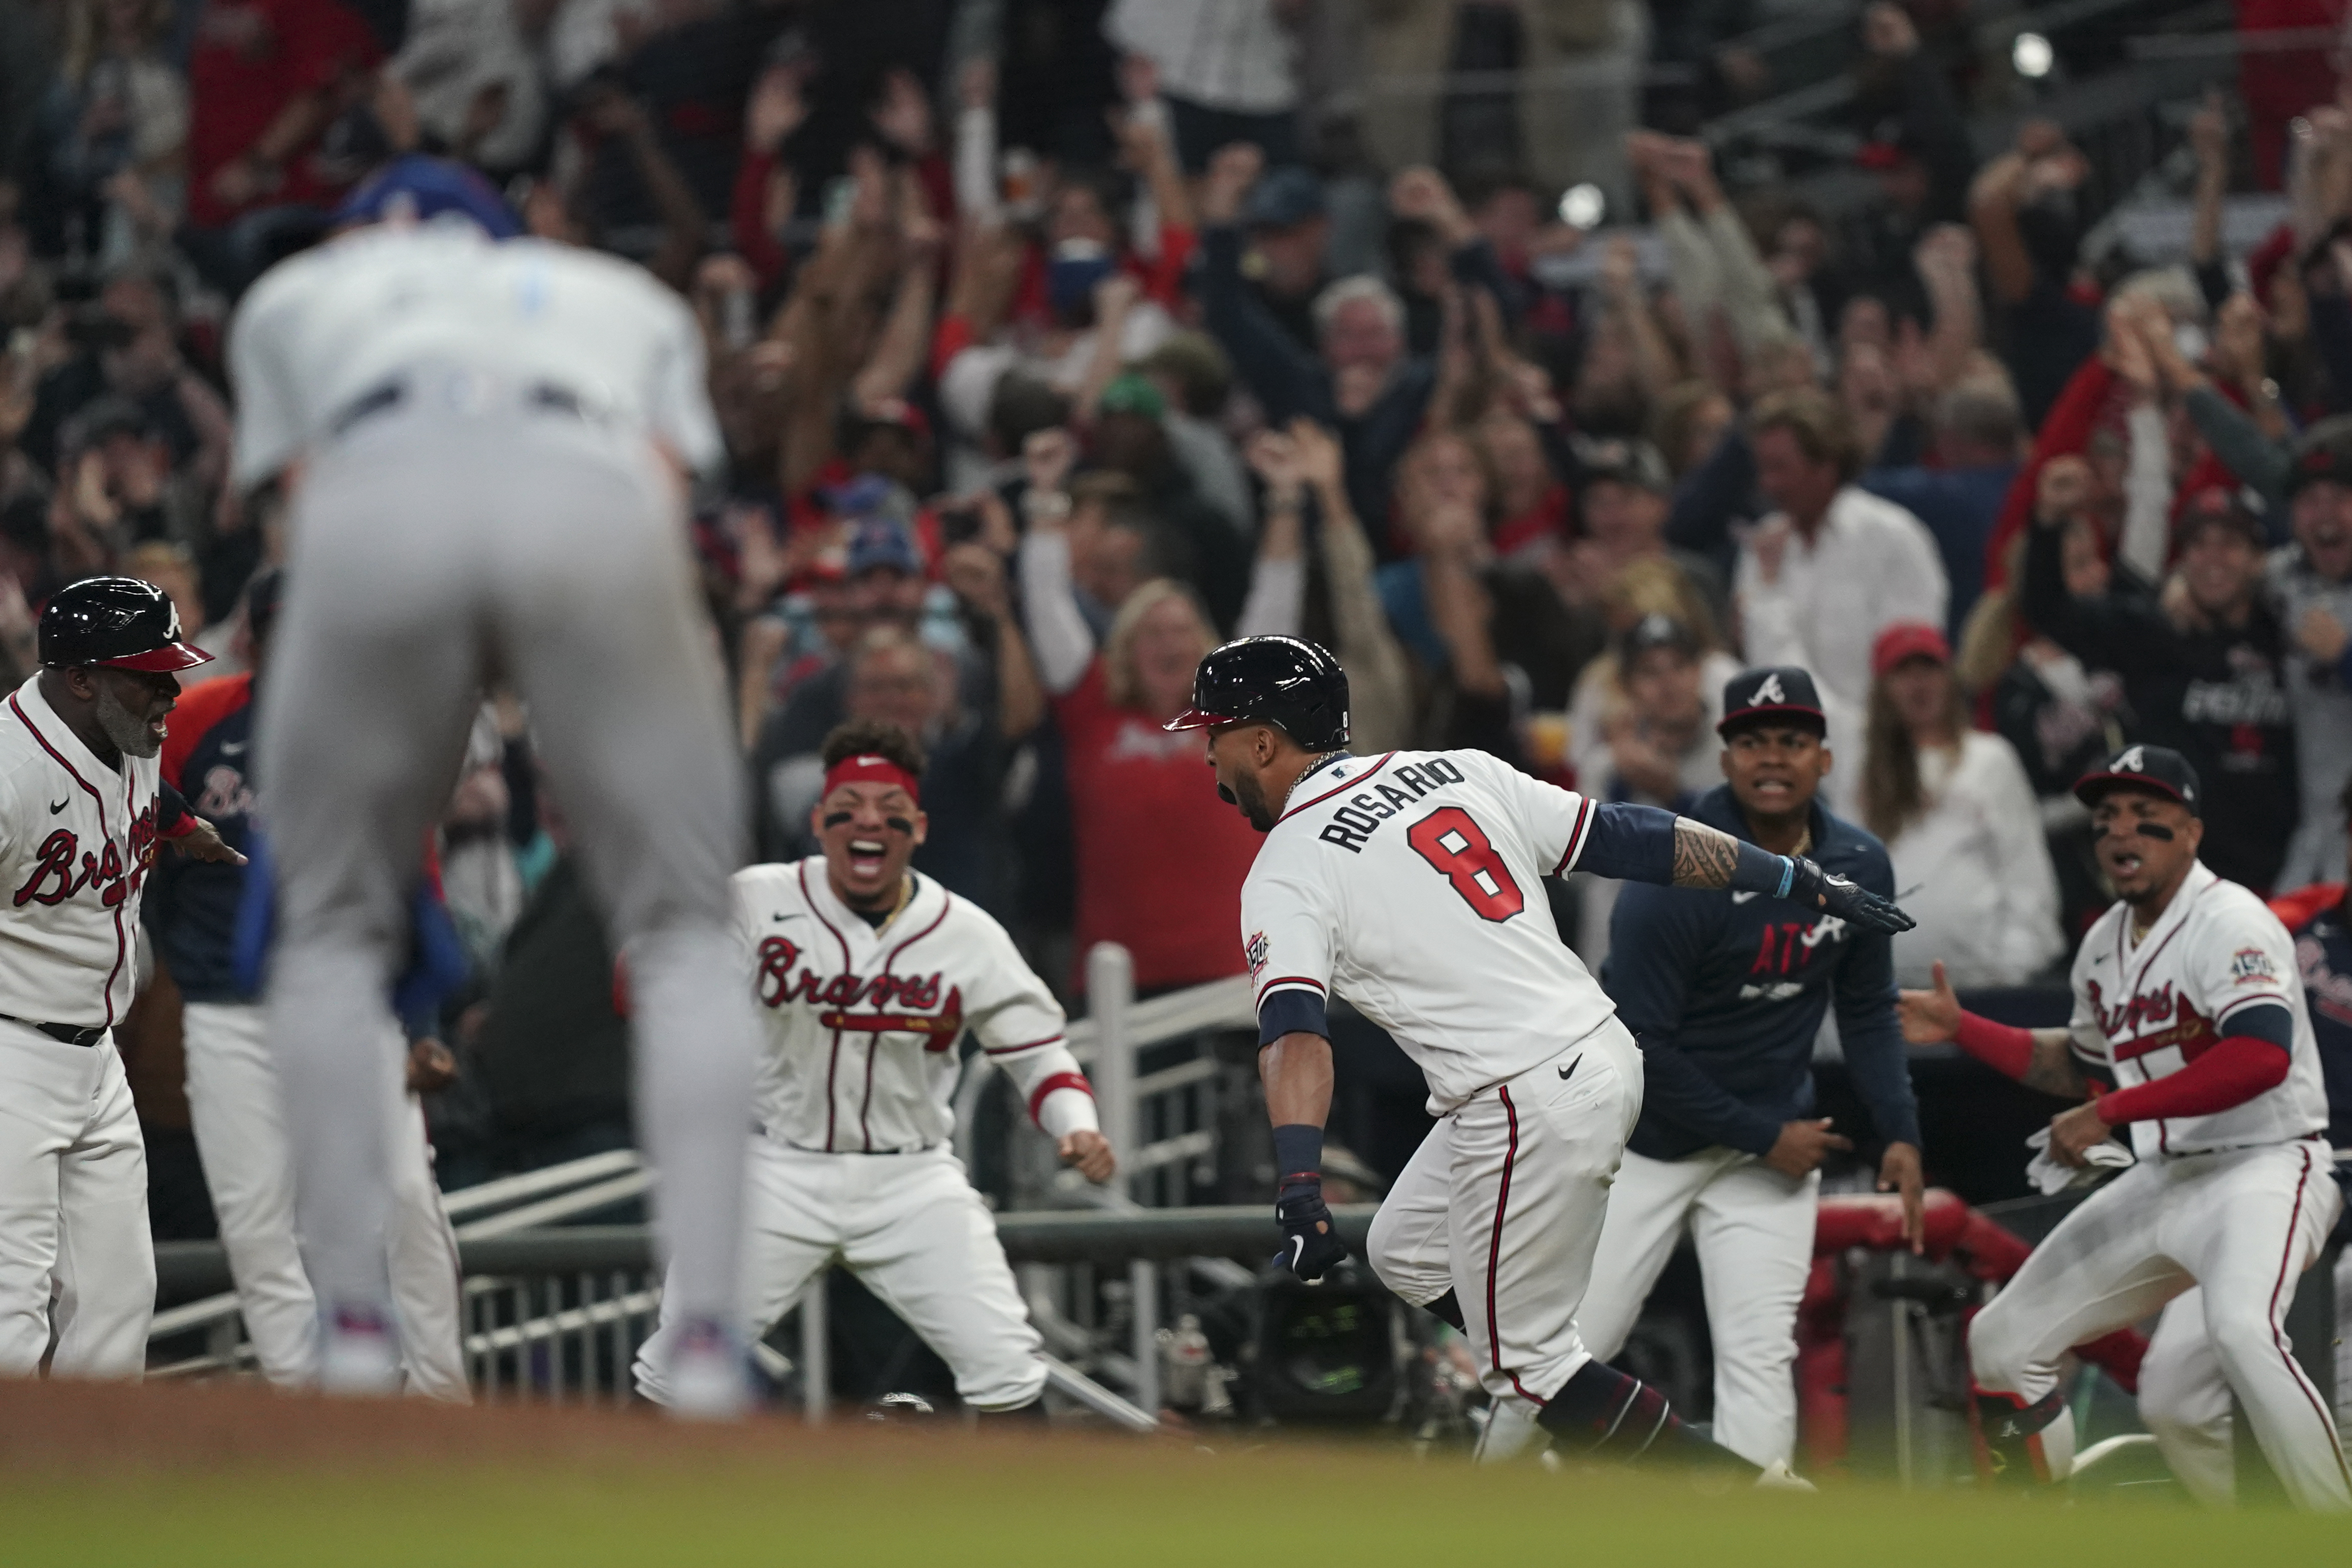 Saturday night's Braves-Dodgers Game 6 will start later